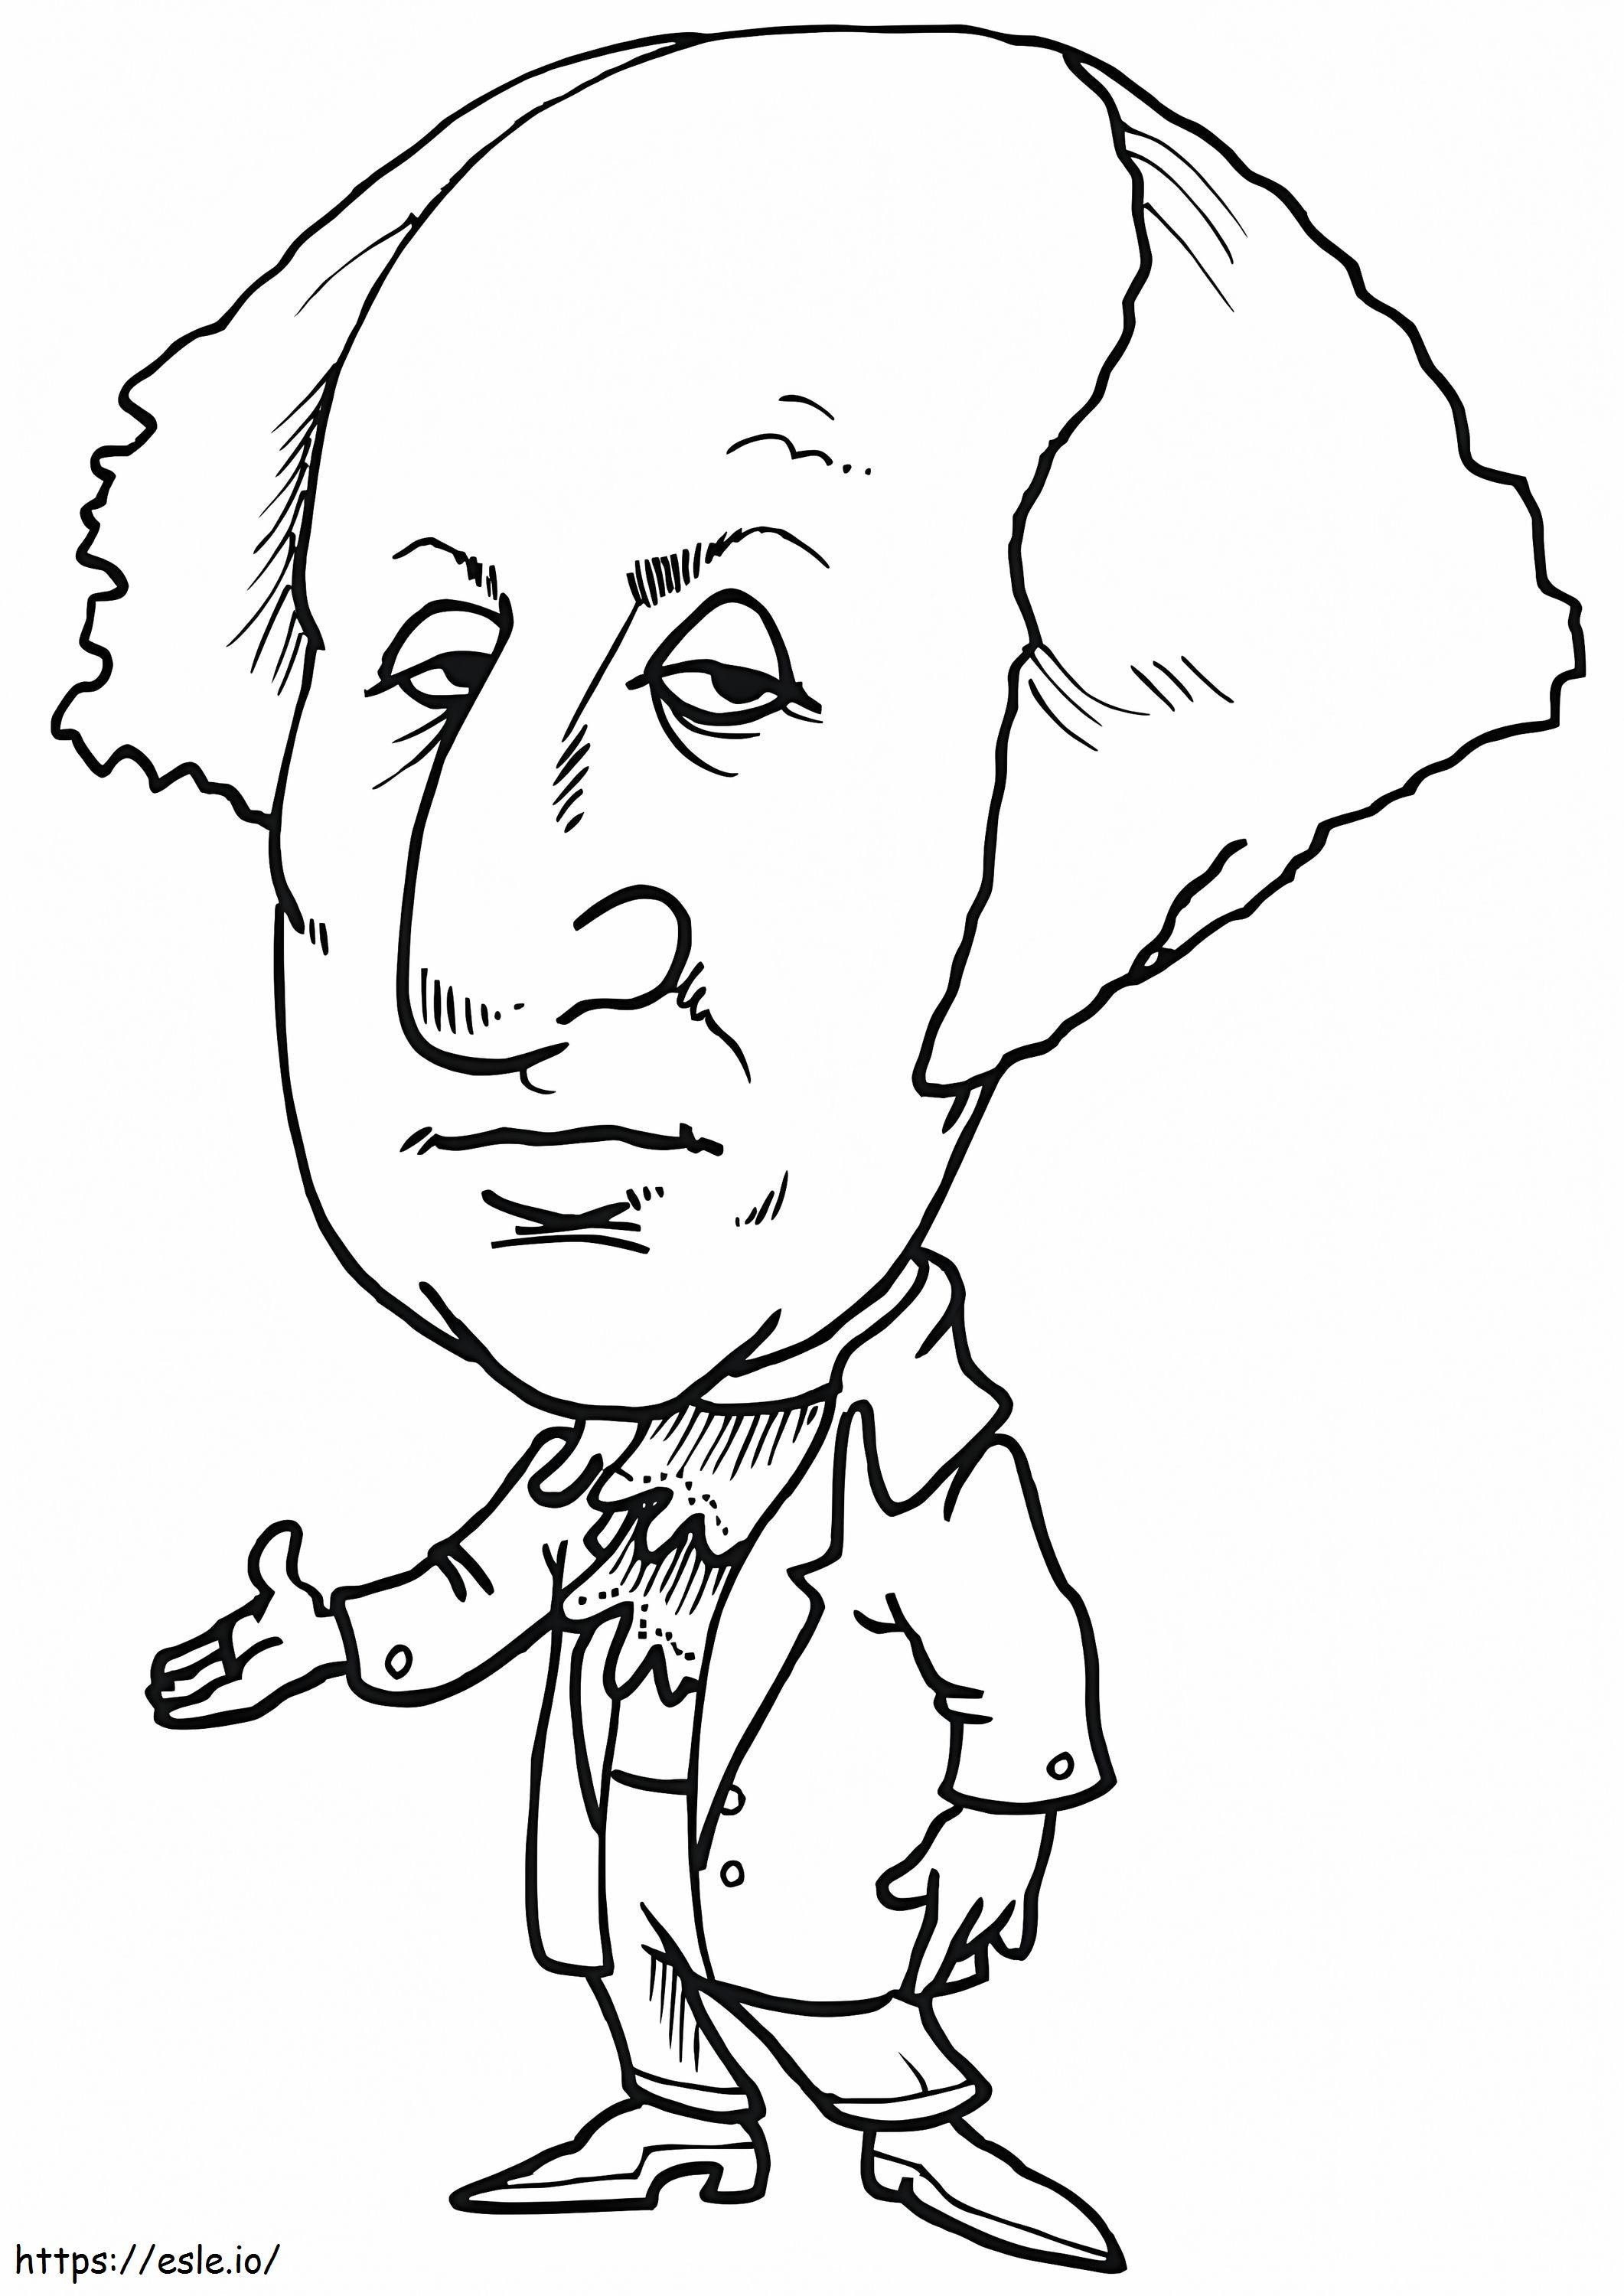 George Washington Caricature coloring page